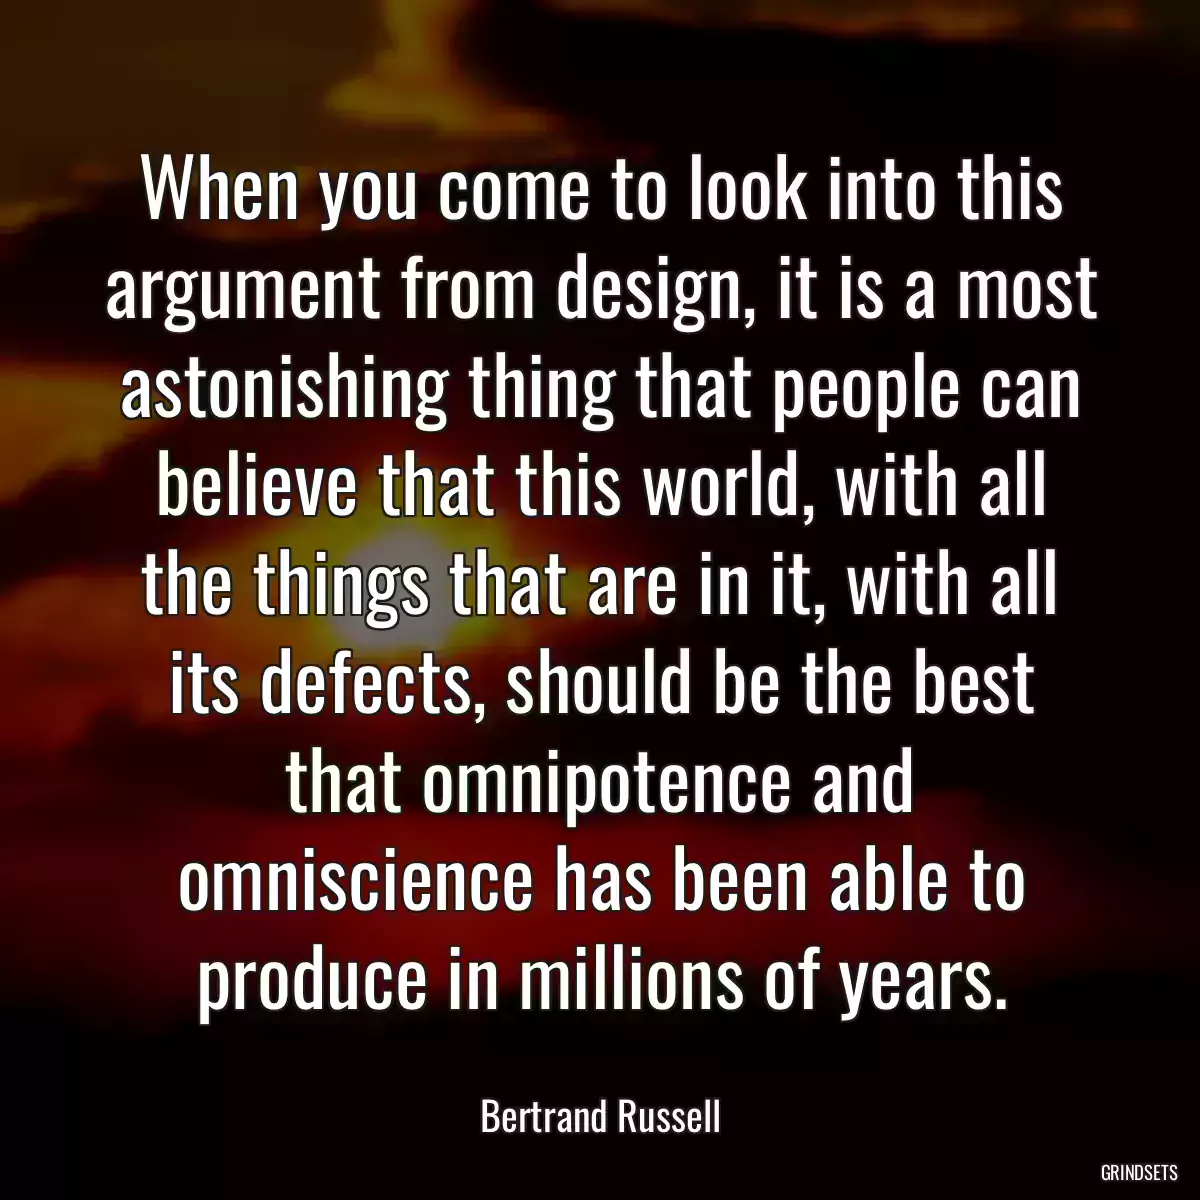 When you come to look into this argument from design, it is a most astonishing thing that people can believe that this world, with all the things that are in it, with all its defects, should be the best that omnipotence and omniscience has been able to produce in millions of years.